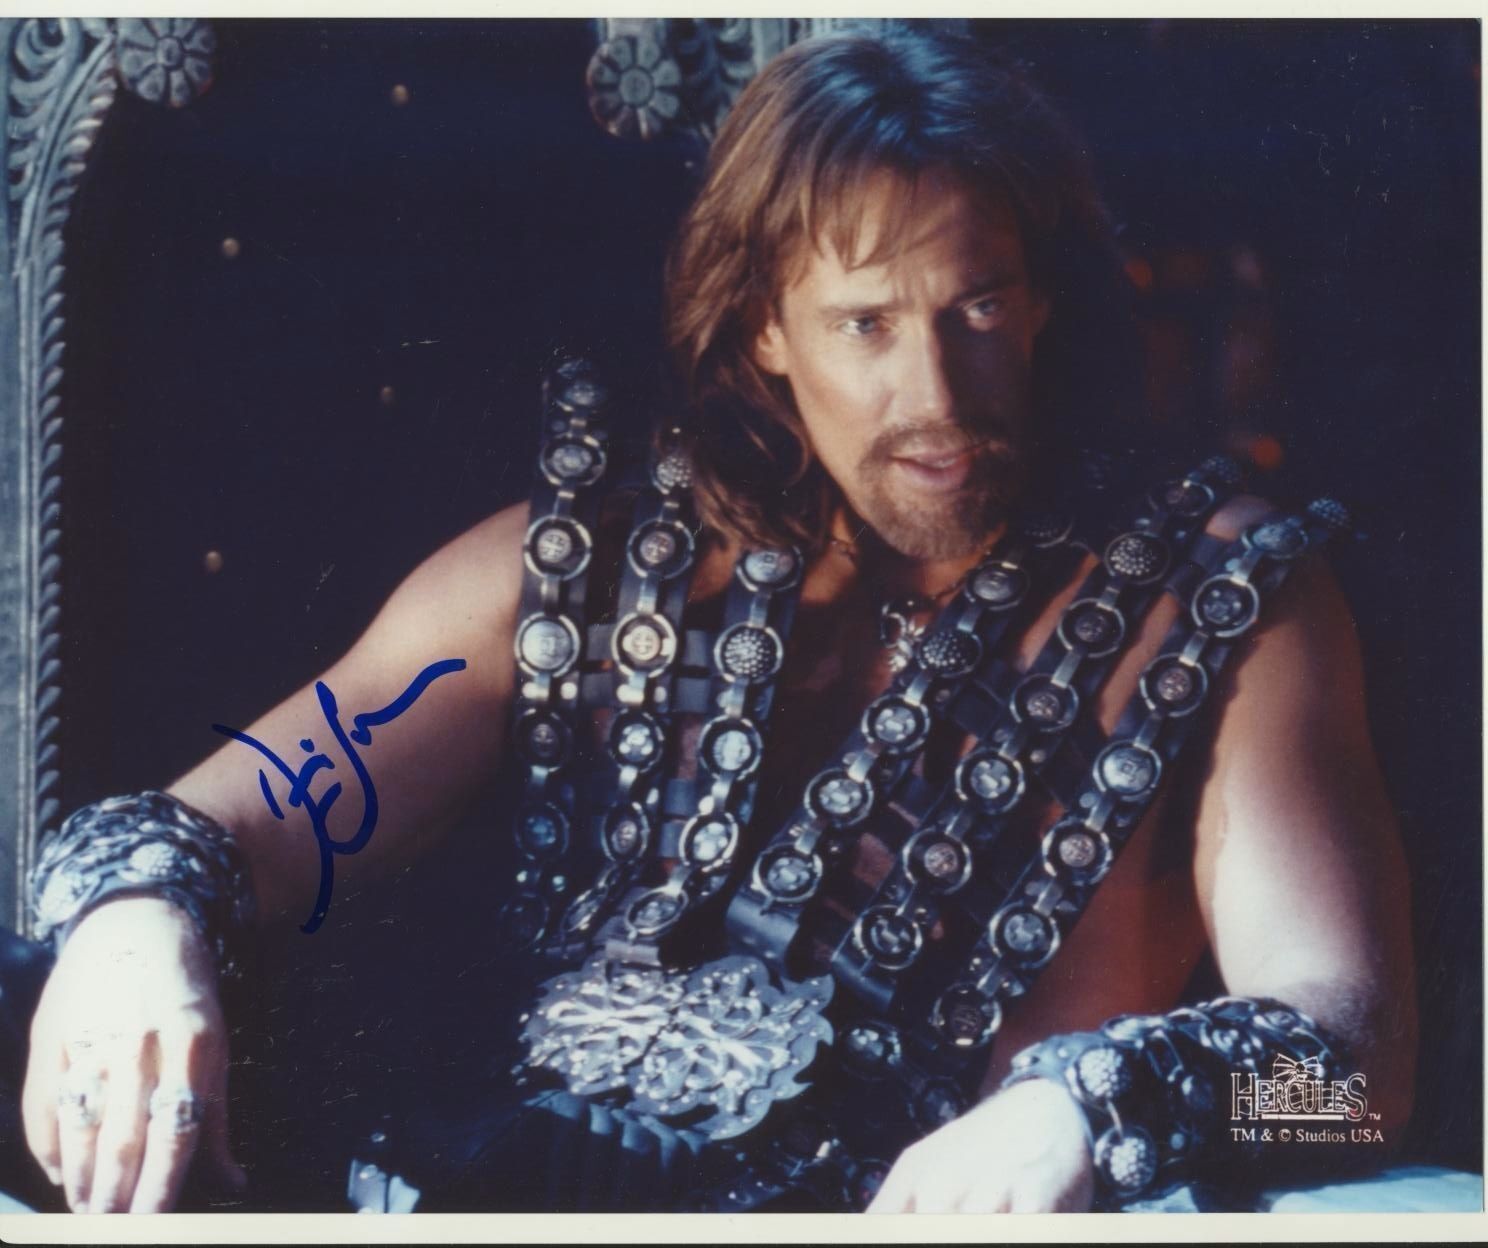 Kevin Sorbo Autograph Signed 8x10 Photo Poster painting AFTAL [7513]